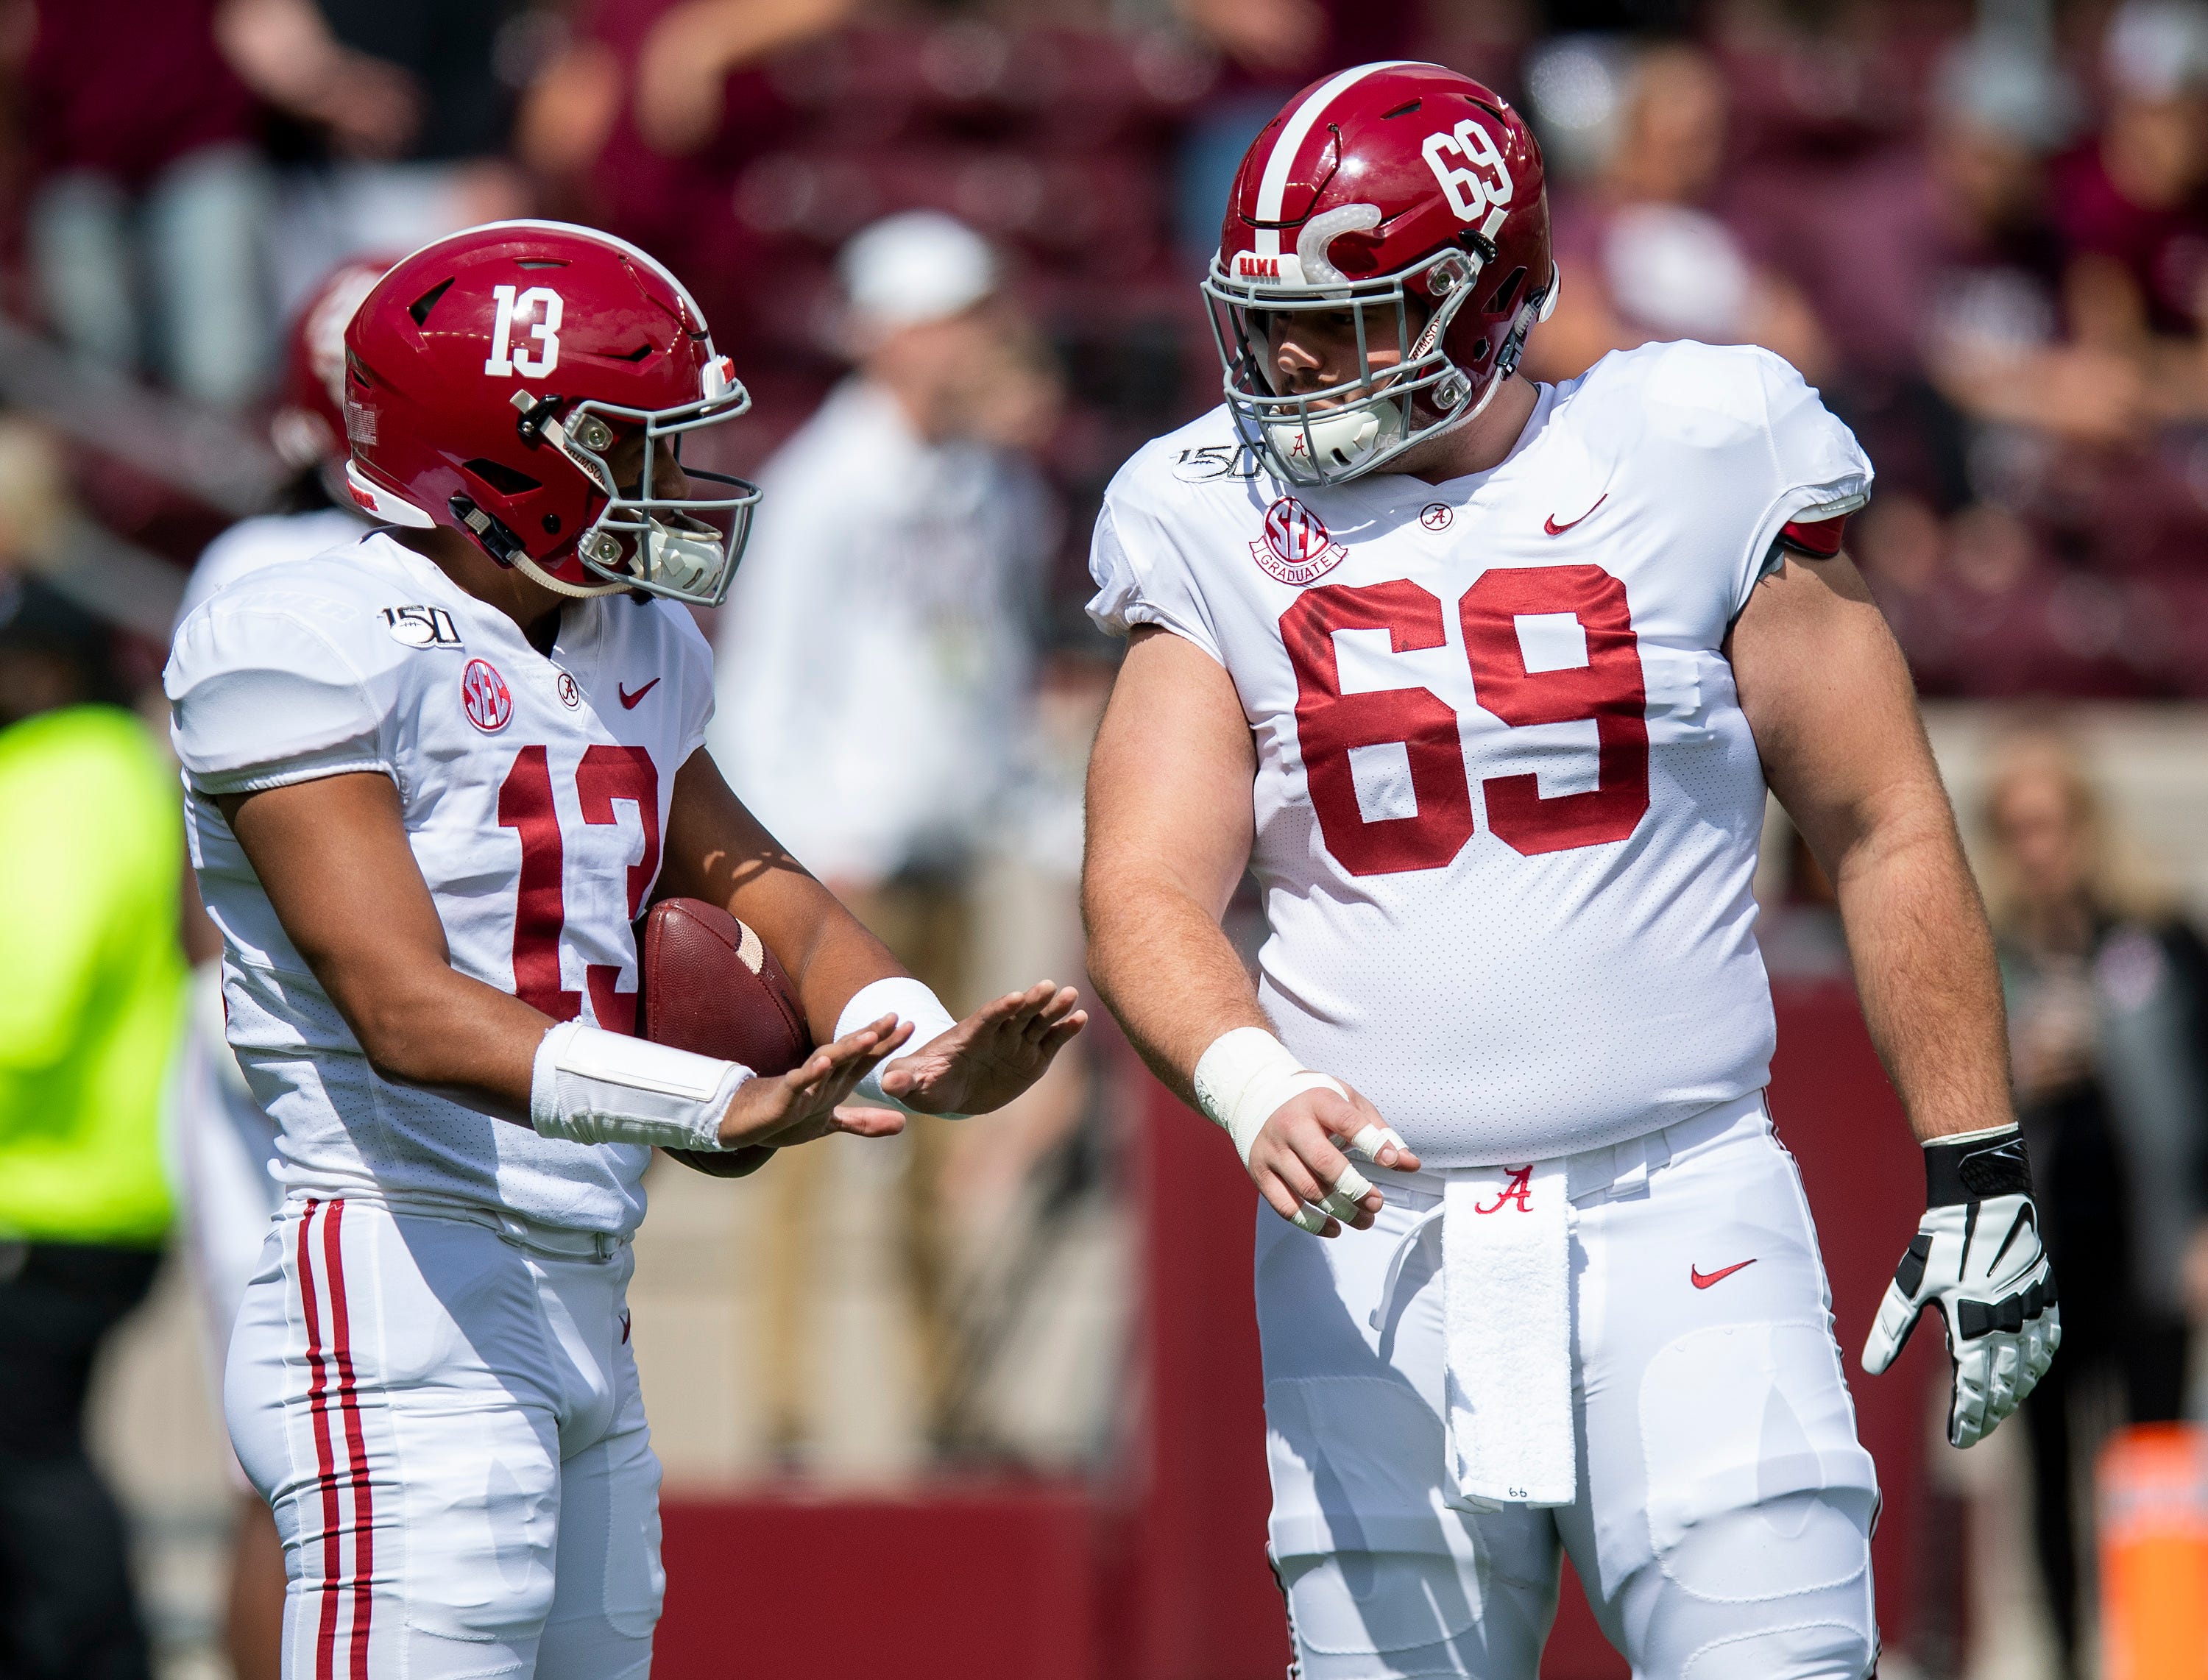 Alabama quarterback Tua Tagovailoa (13) talks with offensive lineman Landon Dickerson (69) before the Texas A&M game at Kyle Field in College Station, Texas on Saturday October 12, 2019.